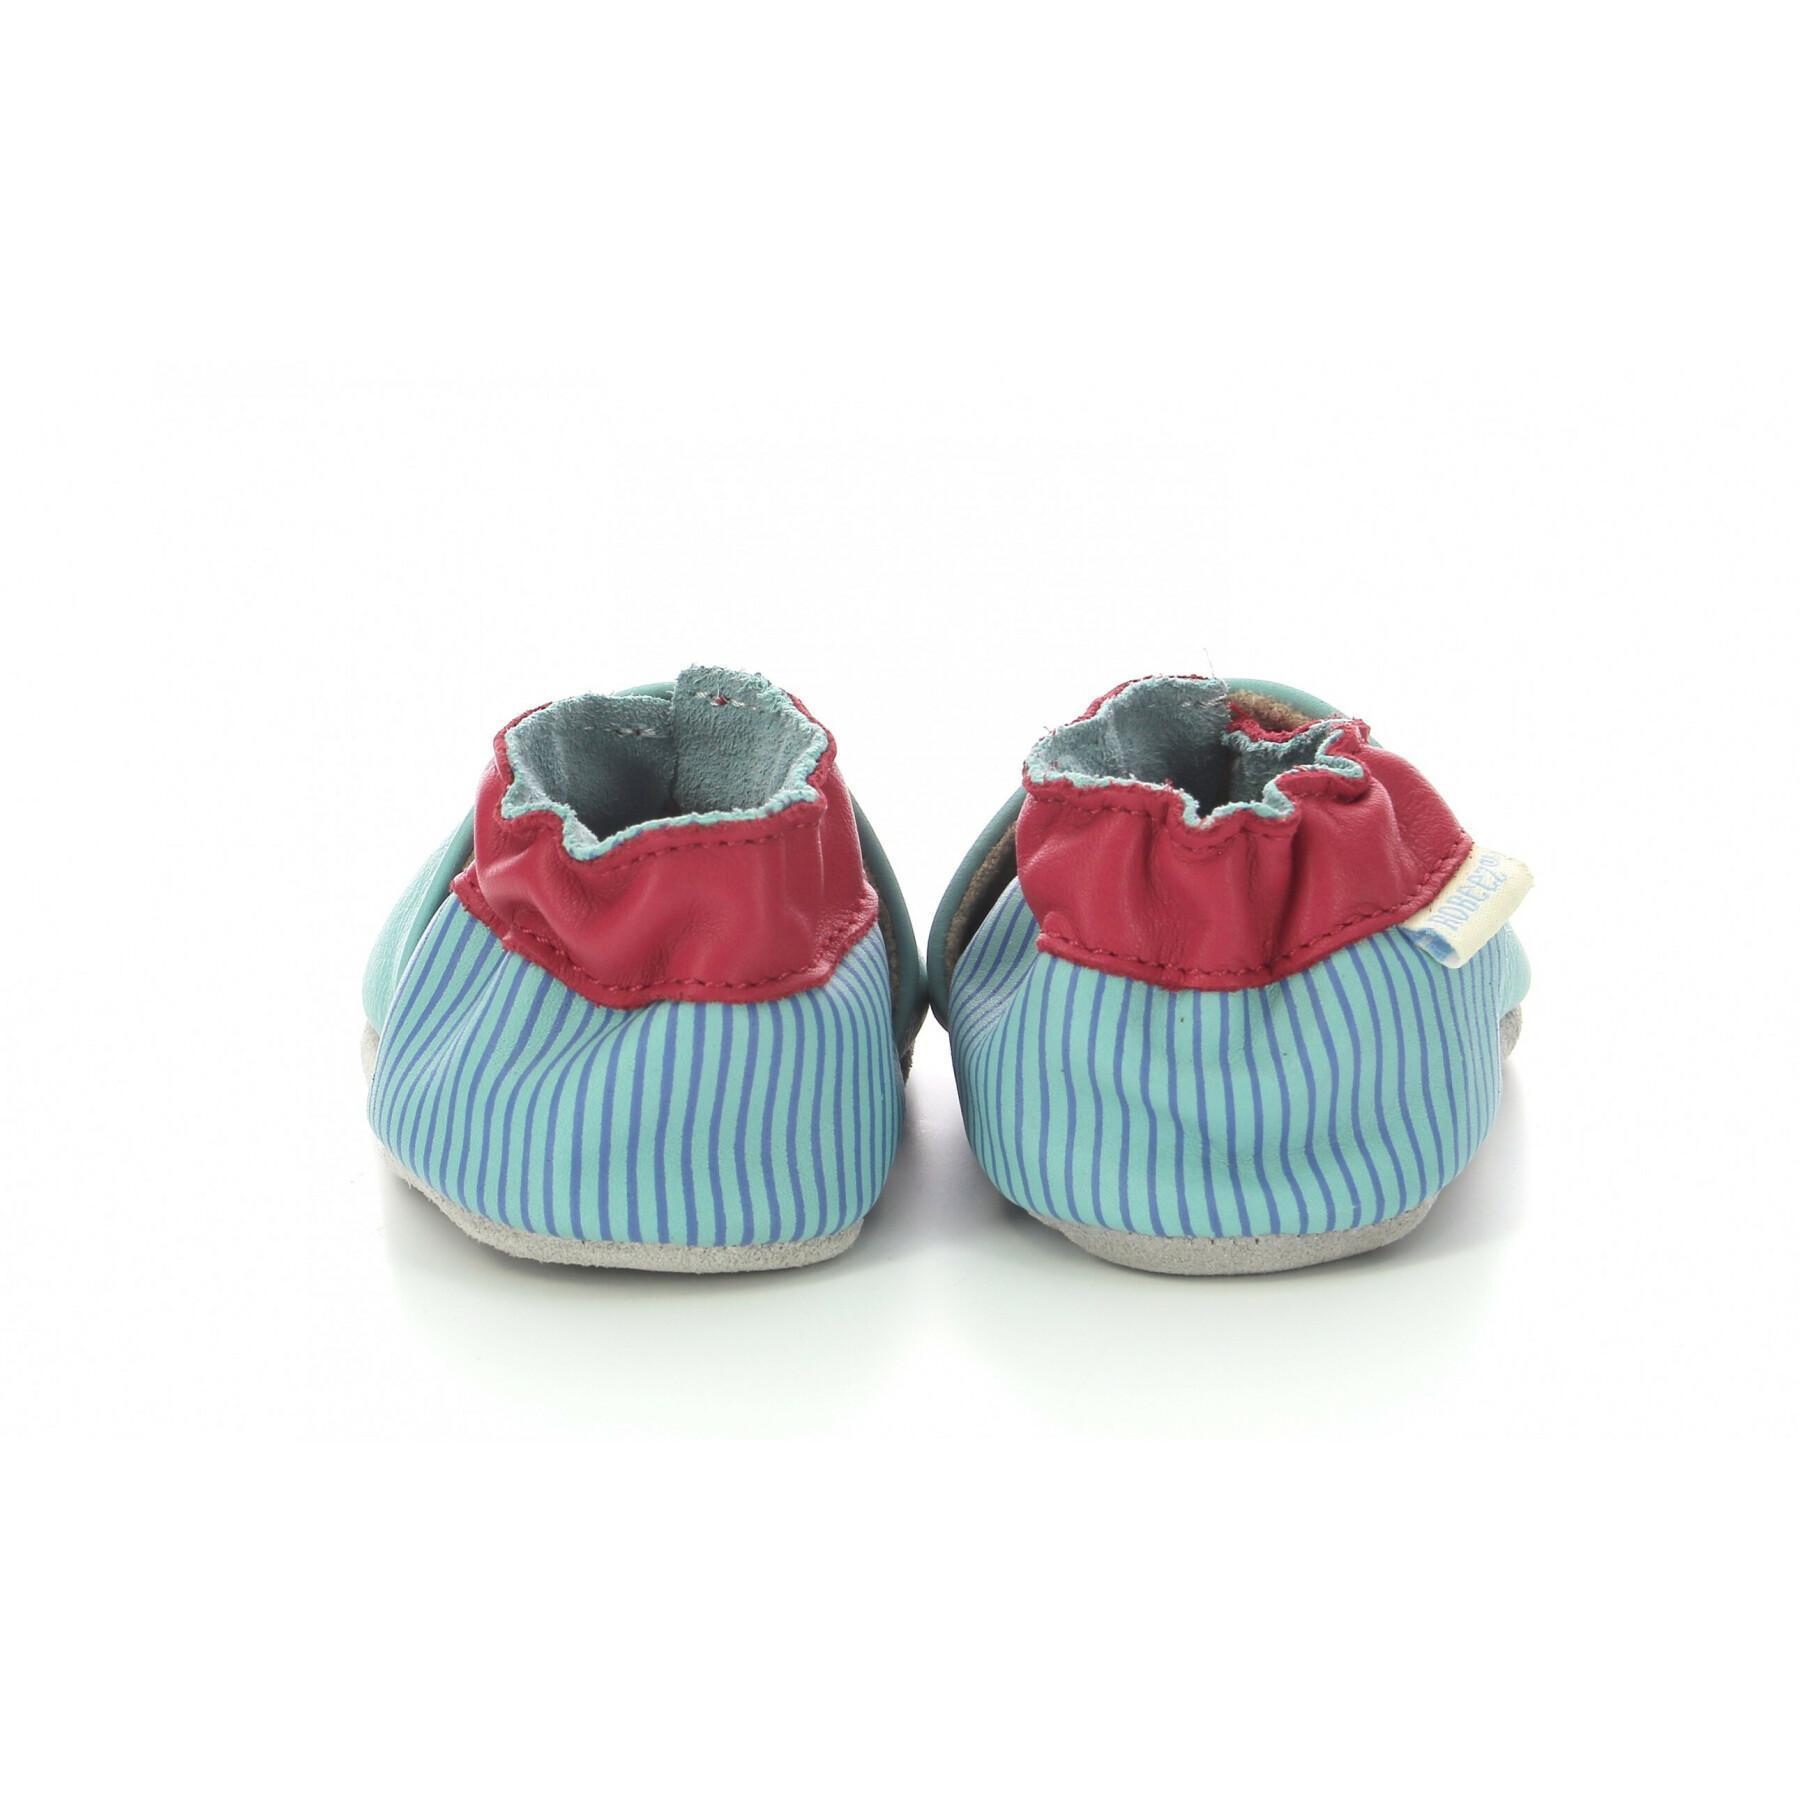 Baby boy shoes Robeez Crab Pirate